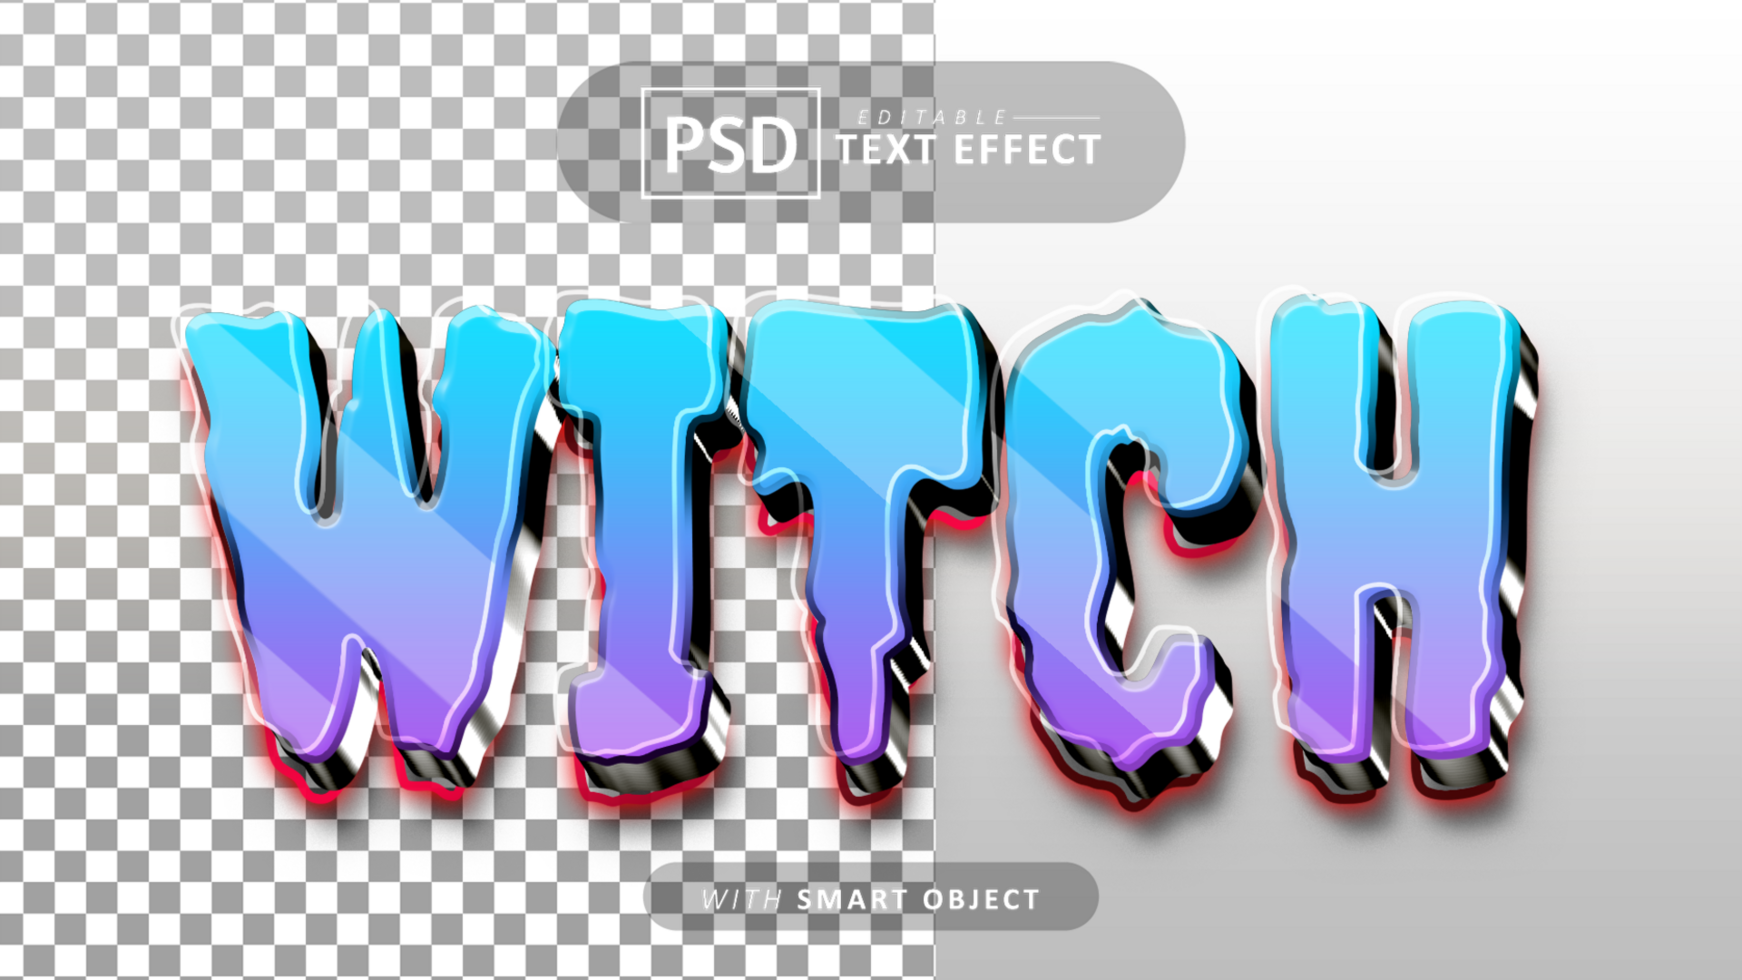 Witch text - editable 3d font effects psd